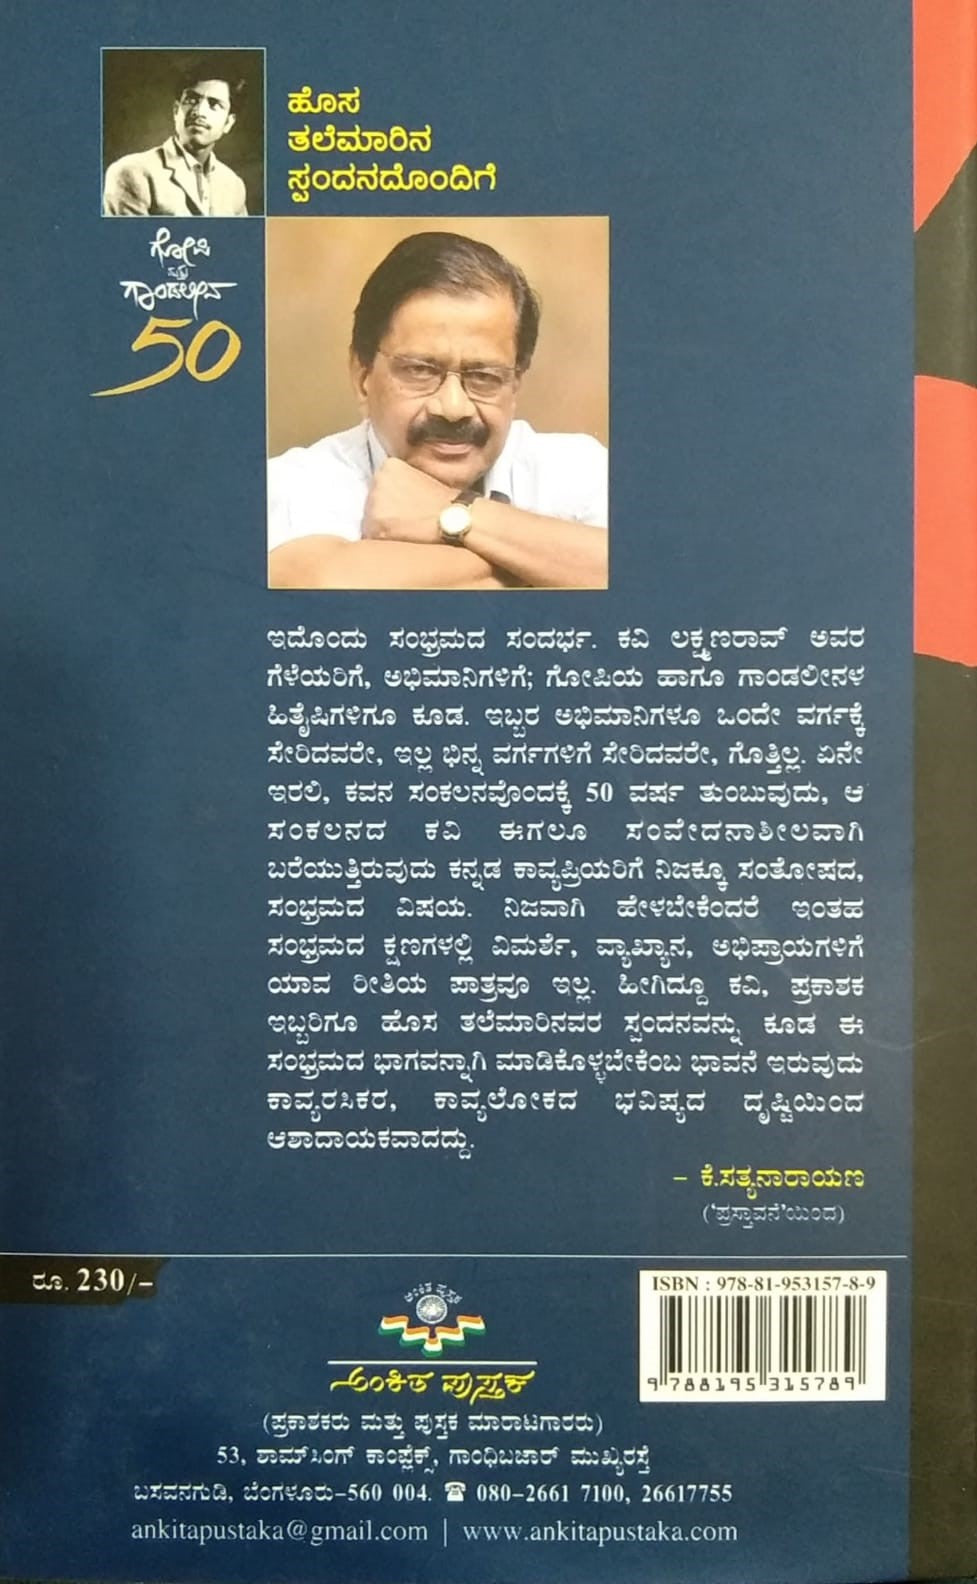 Gopi mattu Gaandaleena is a Collection of Poems which is Written by B. R. Lakshmanrao and Published by Ankita Pustaka